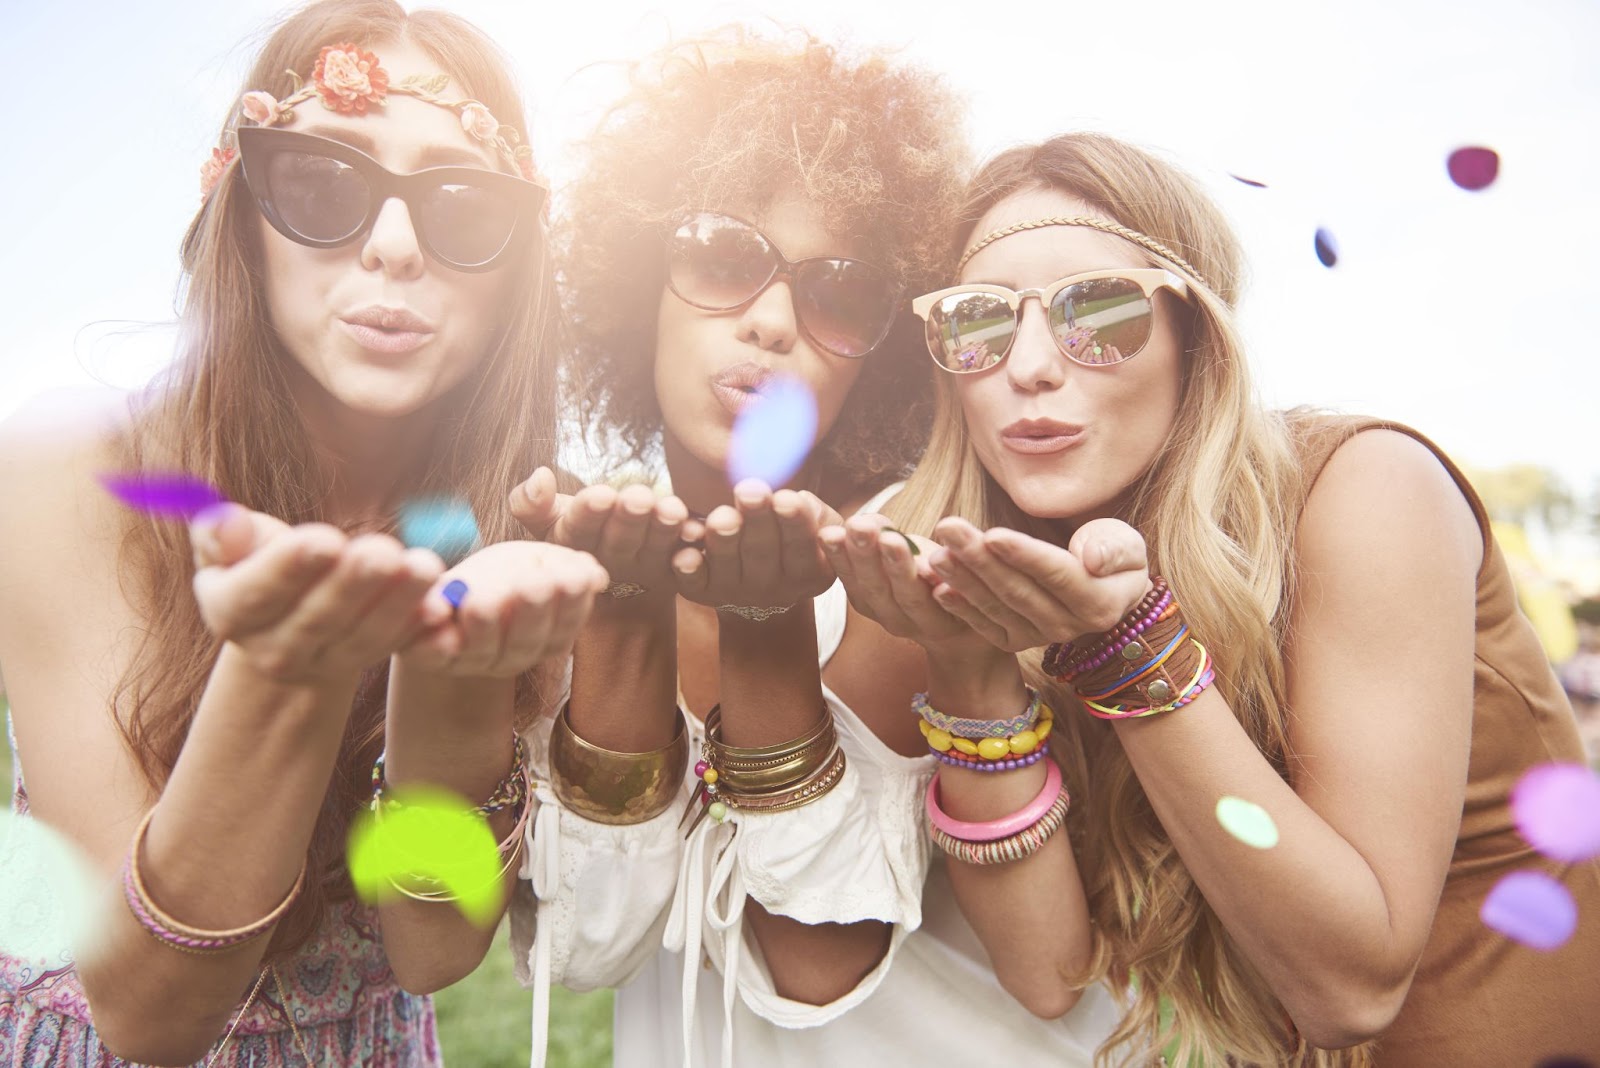 Three women adorned with sunglasses, headbands, and bracelets blow confetti into the camera at a summer festival